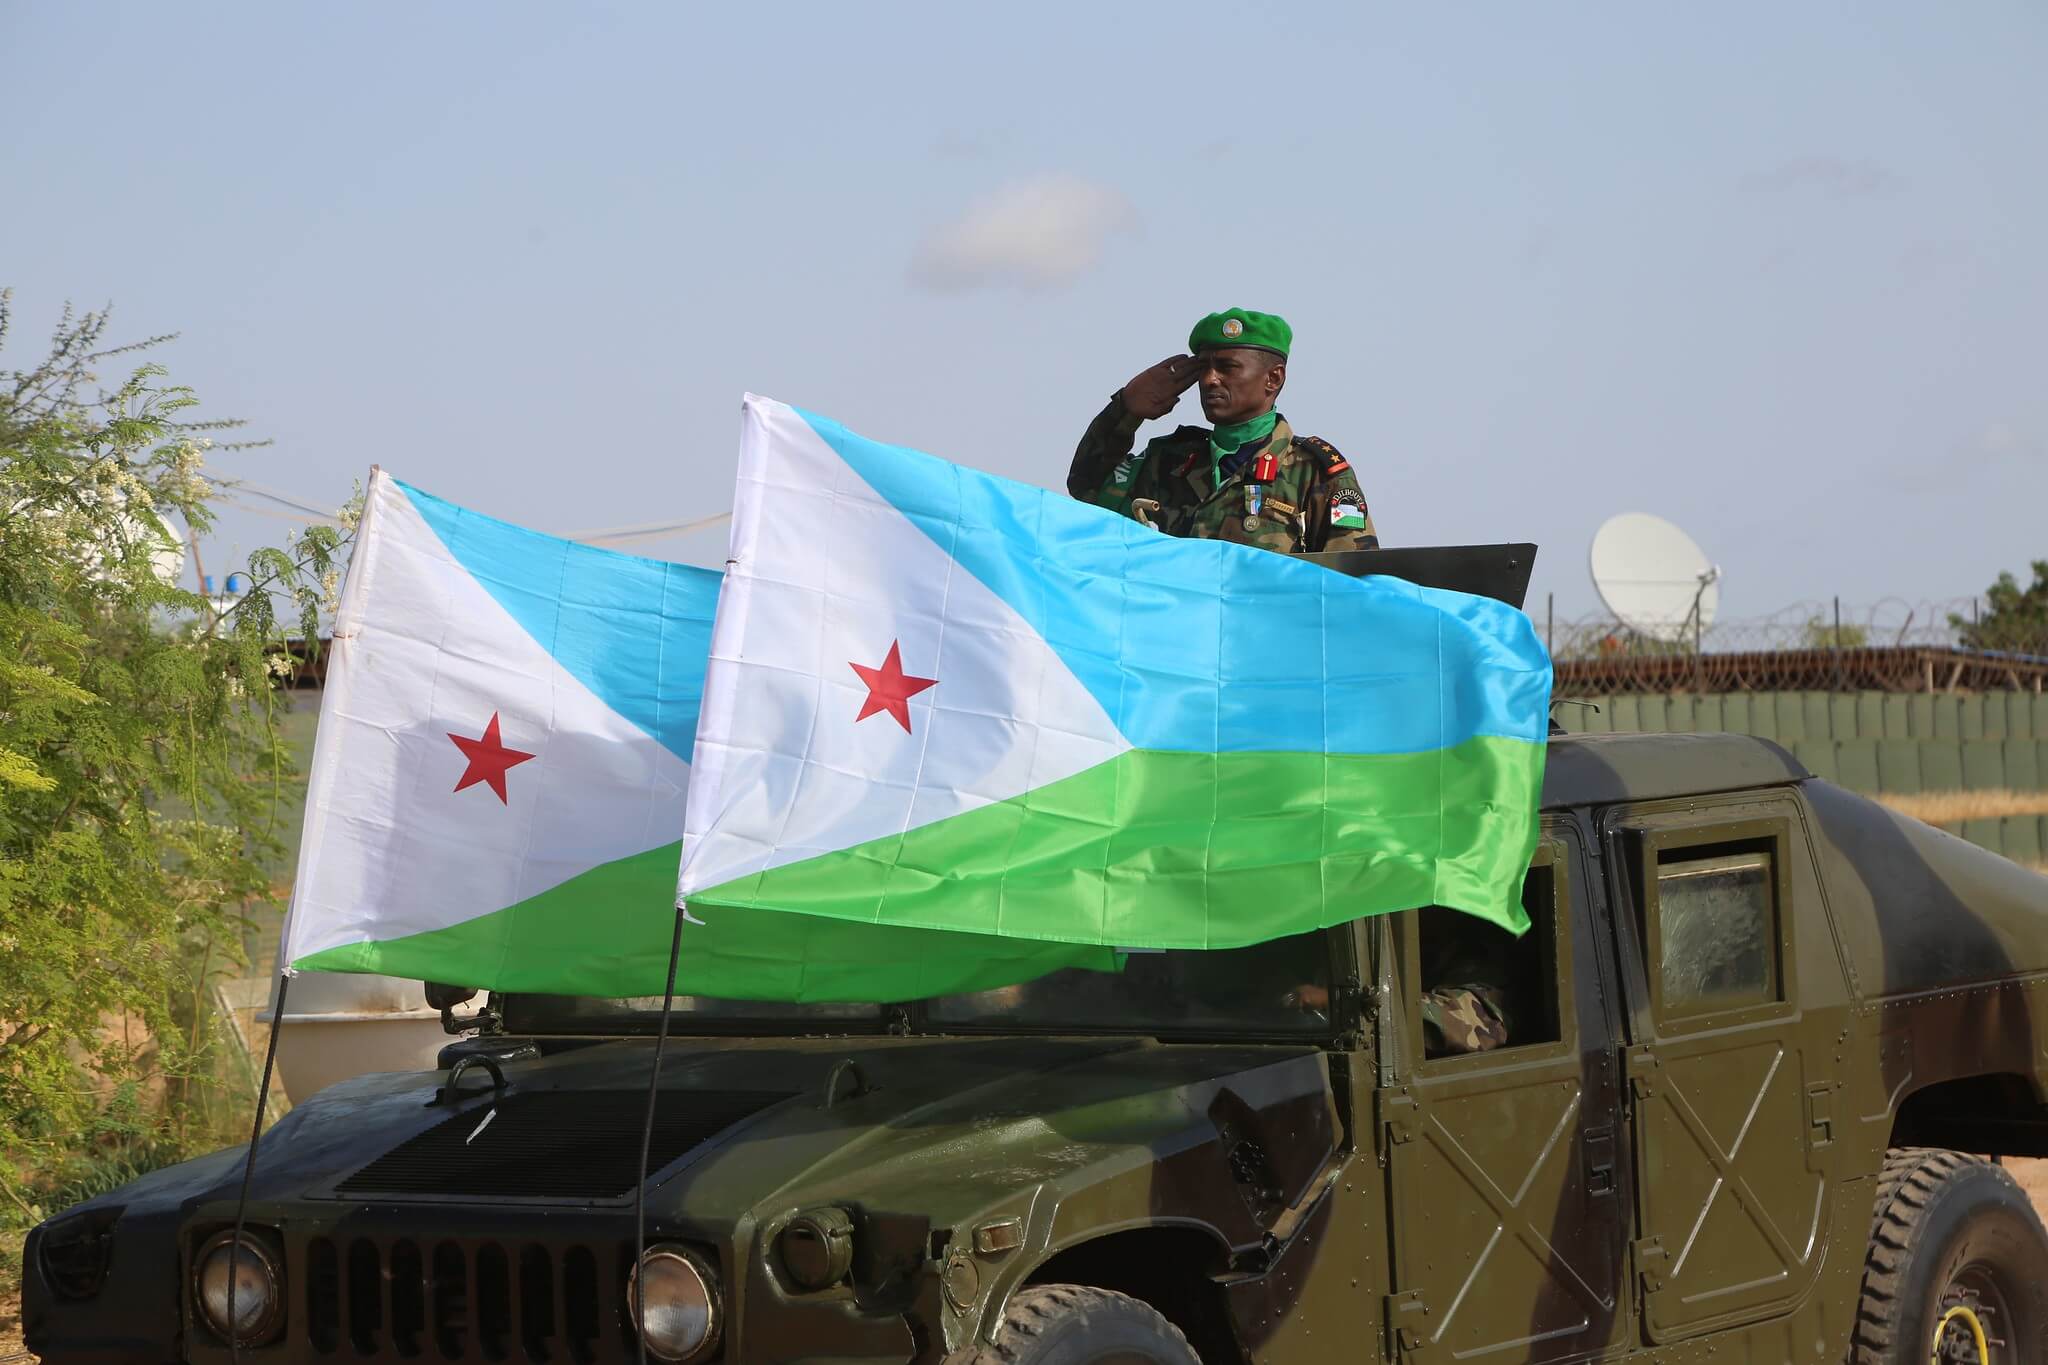 A Djiboutian soldier serving under AMISOM salutes during a parade celebrate Djibouti's 44th Independence Day at AMISOM Sector 4 Headquarters in Beletweyne, Hirshabelle State, on 27 June 2021